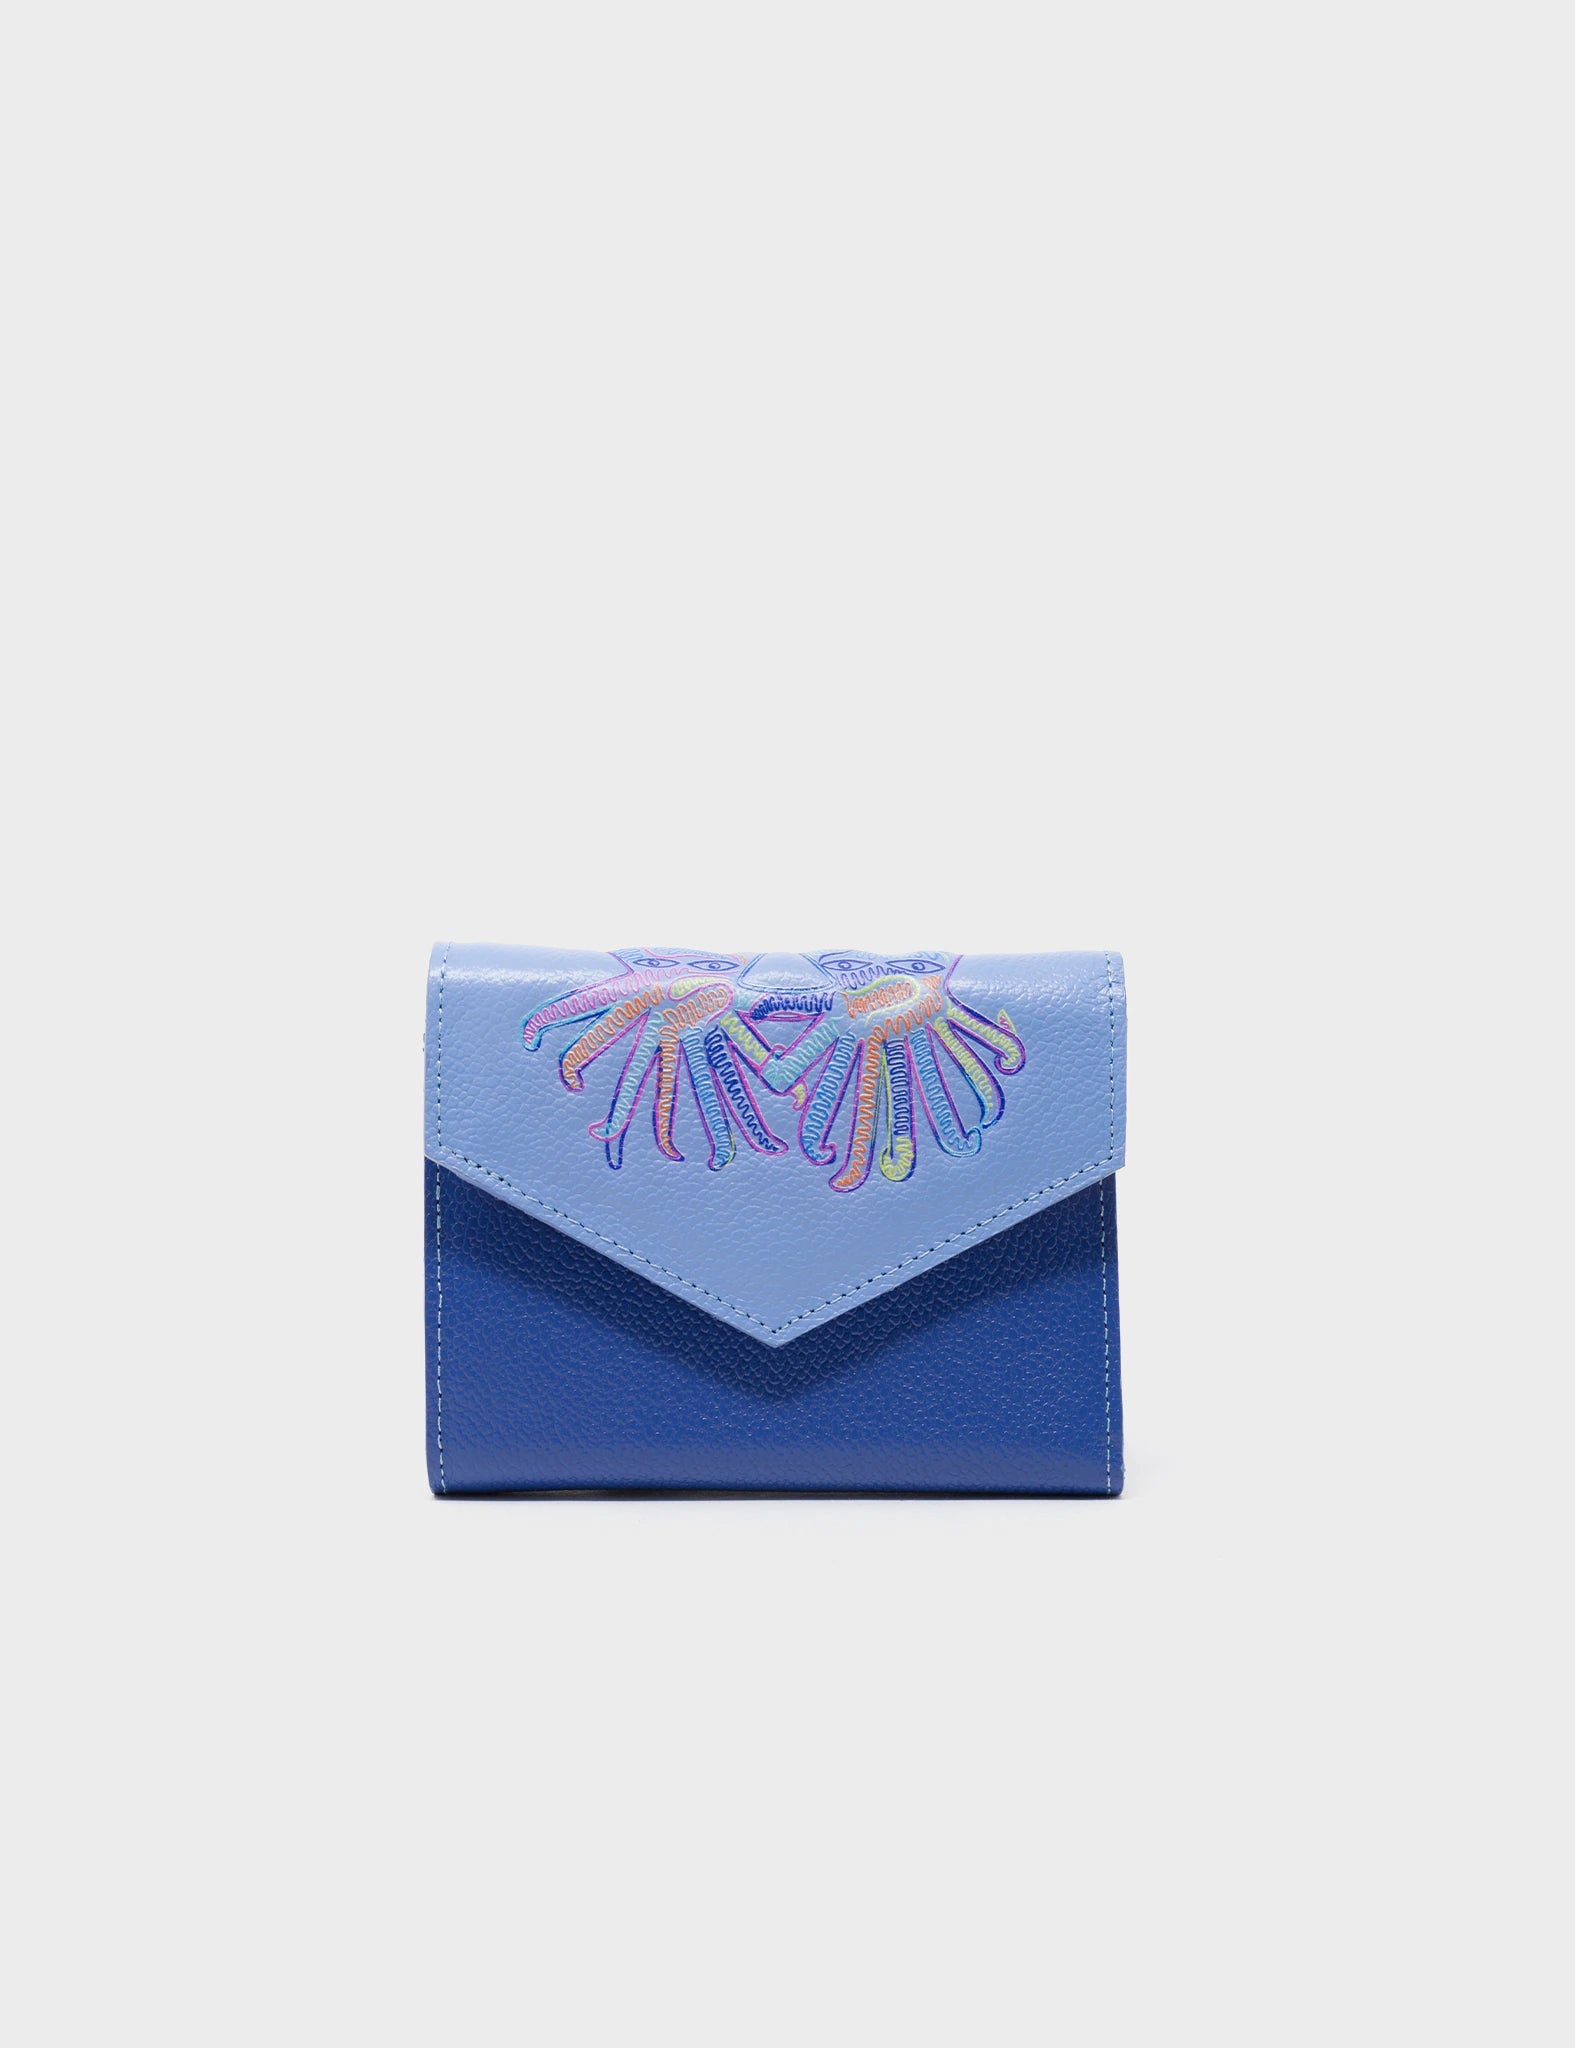 Billfold Blue Wallet With Flap | Multicolored Octopus Design 